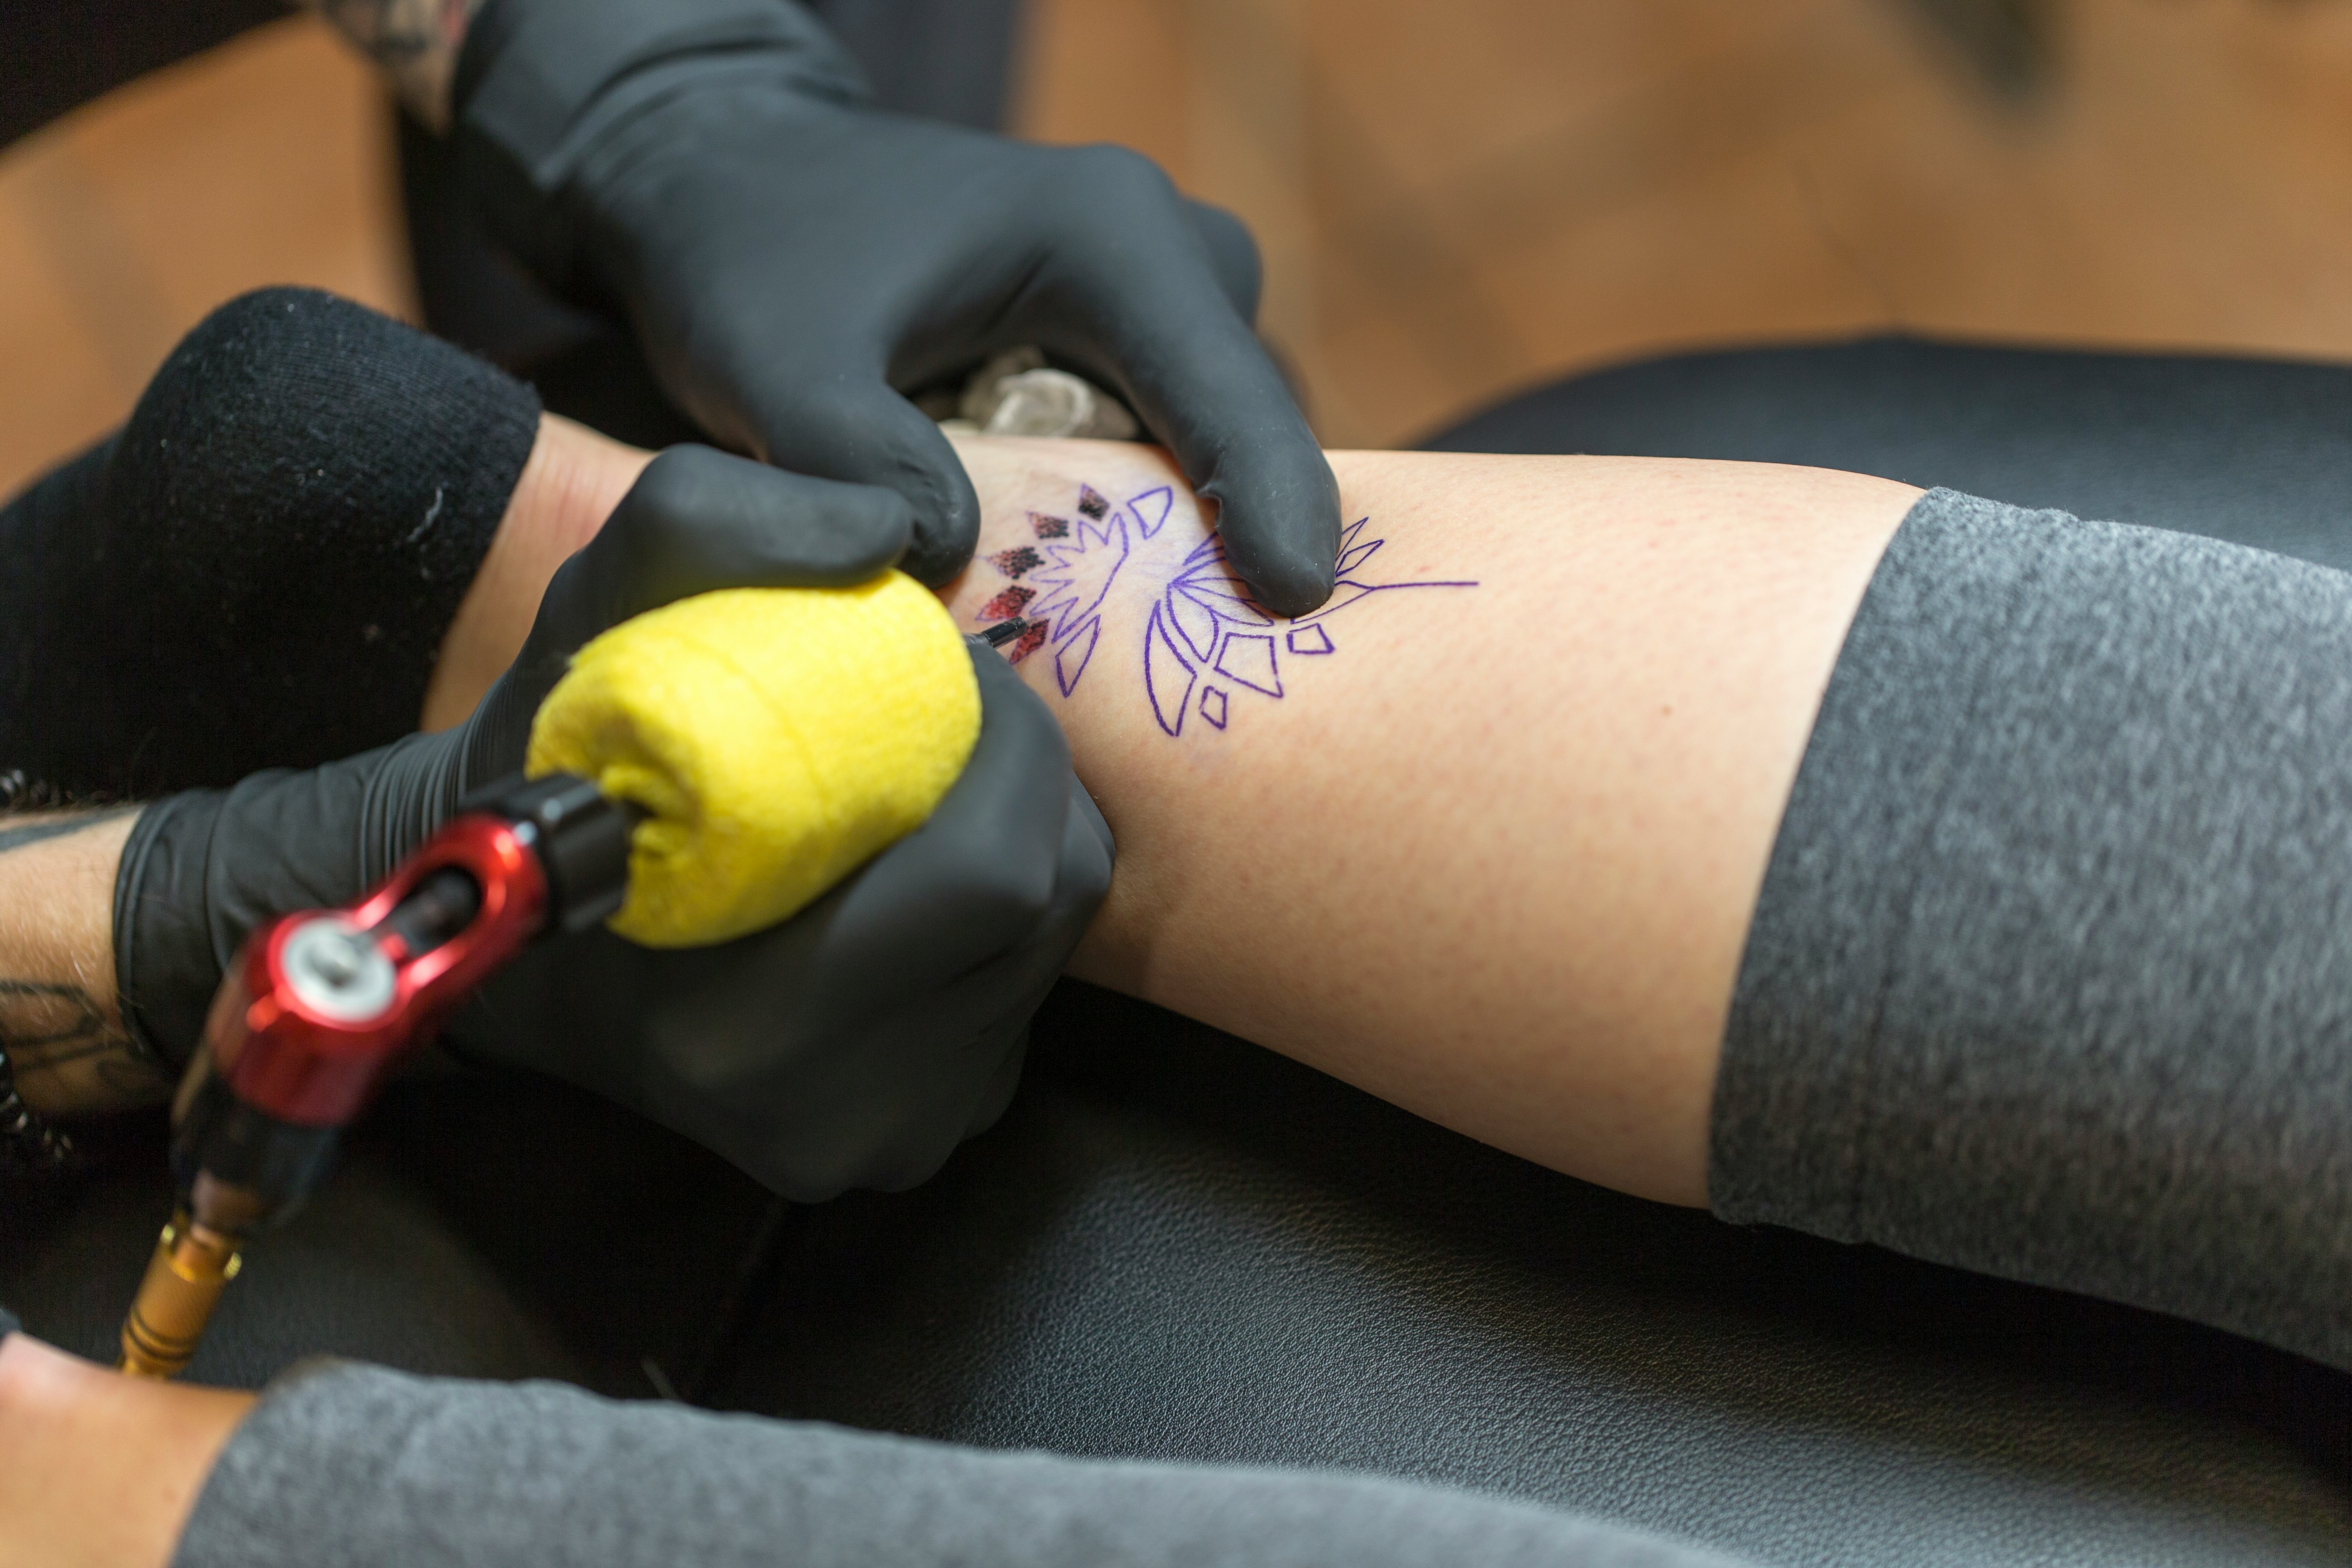 Scars From Tattoos Are You At Risk For Tattoo Keloids And Other Tattoo  Scars  ScarScore